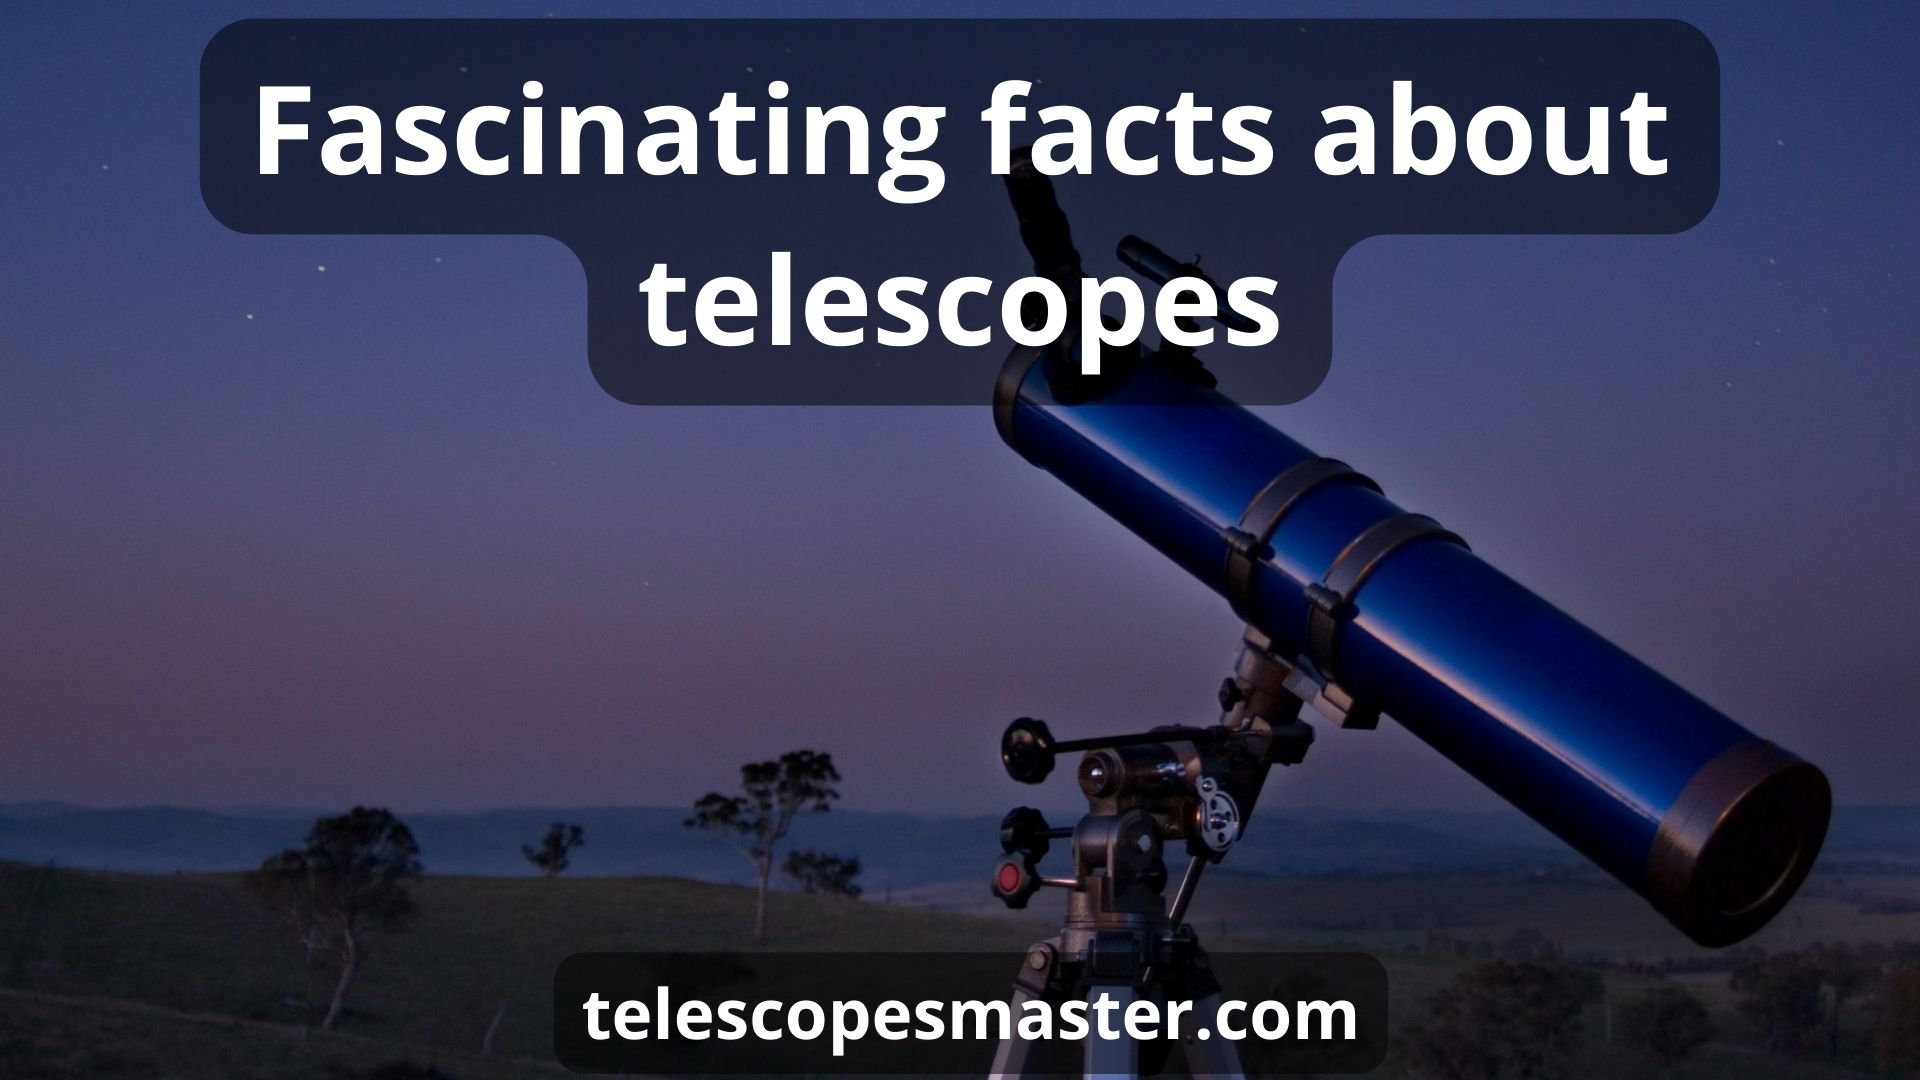 Fascinating facts about telescopes